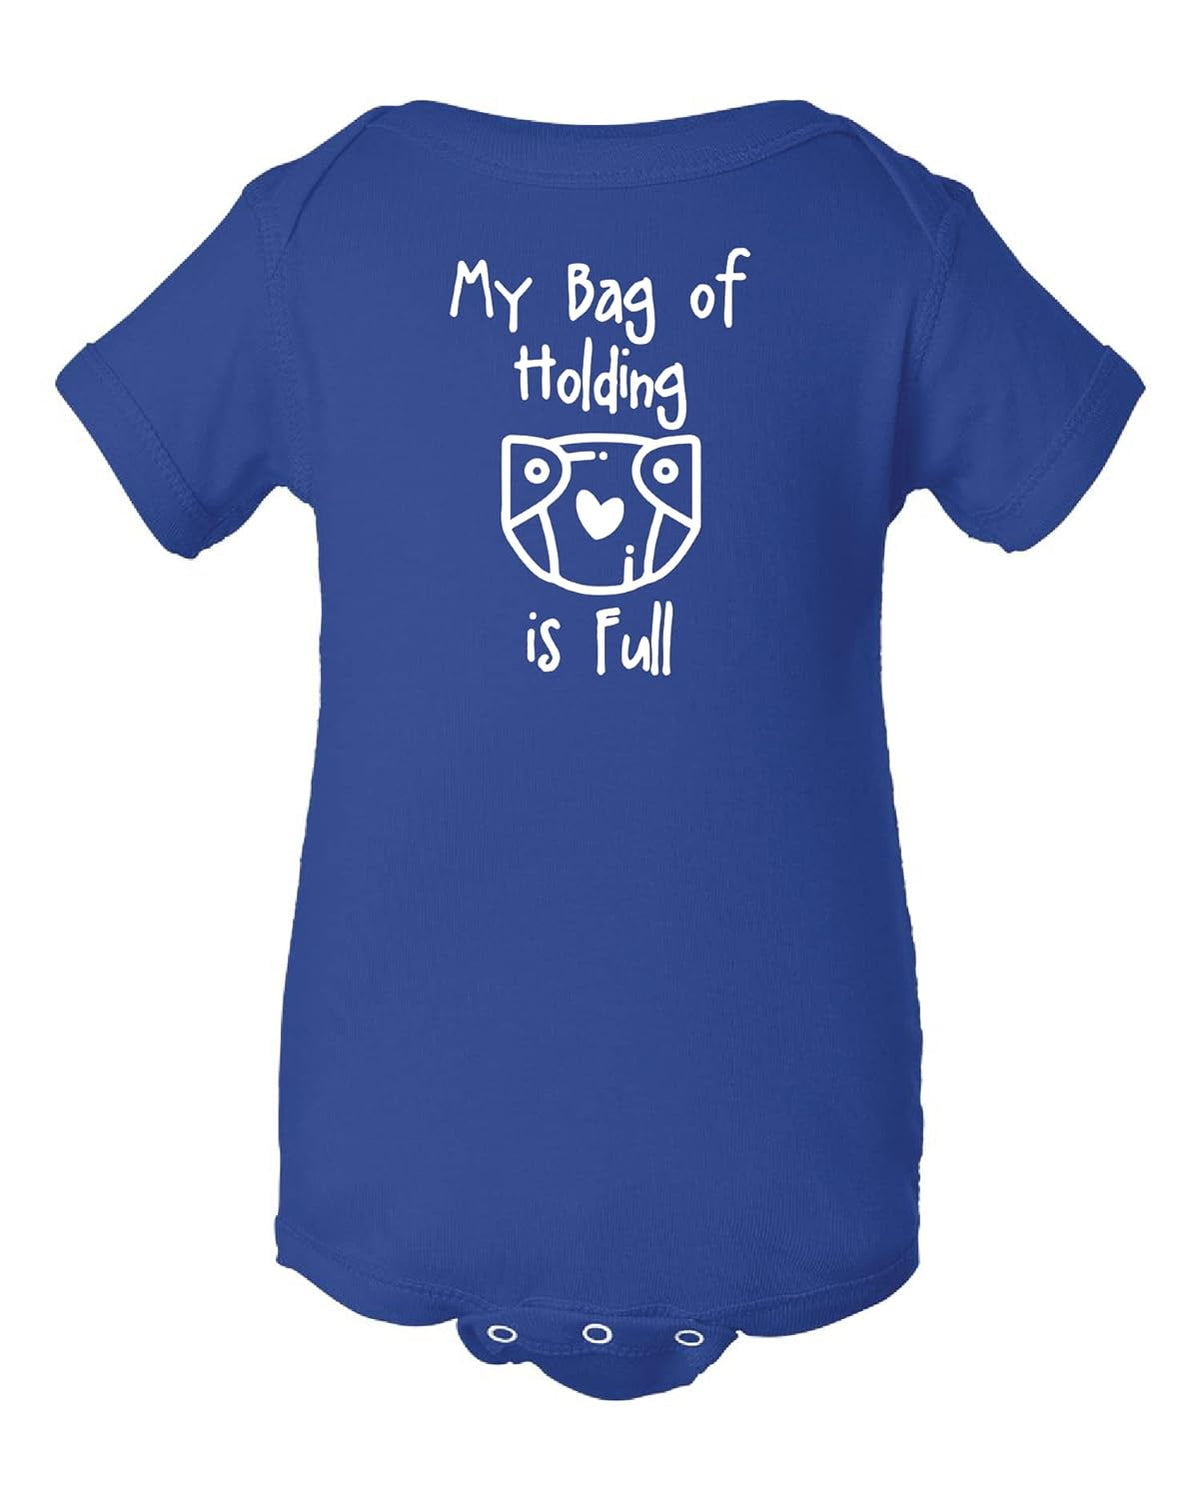 Dnd Baby Shirt-"My Bag of Holding is Full". Dnd Baby, DnD Gifts, Anime Baby, Nerdy Baby, Tabletop Gaming, Dnd Shirt, D&D Baby. (6 month US numeric, Royal w/White)